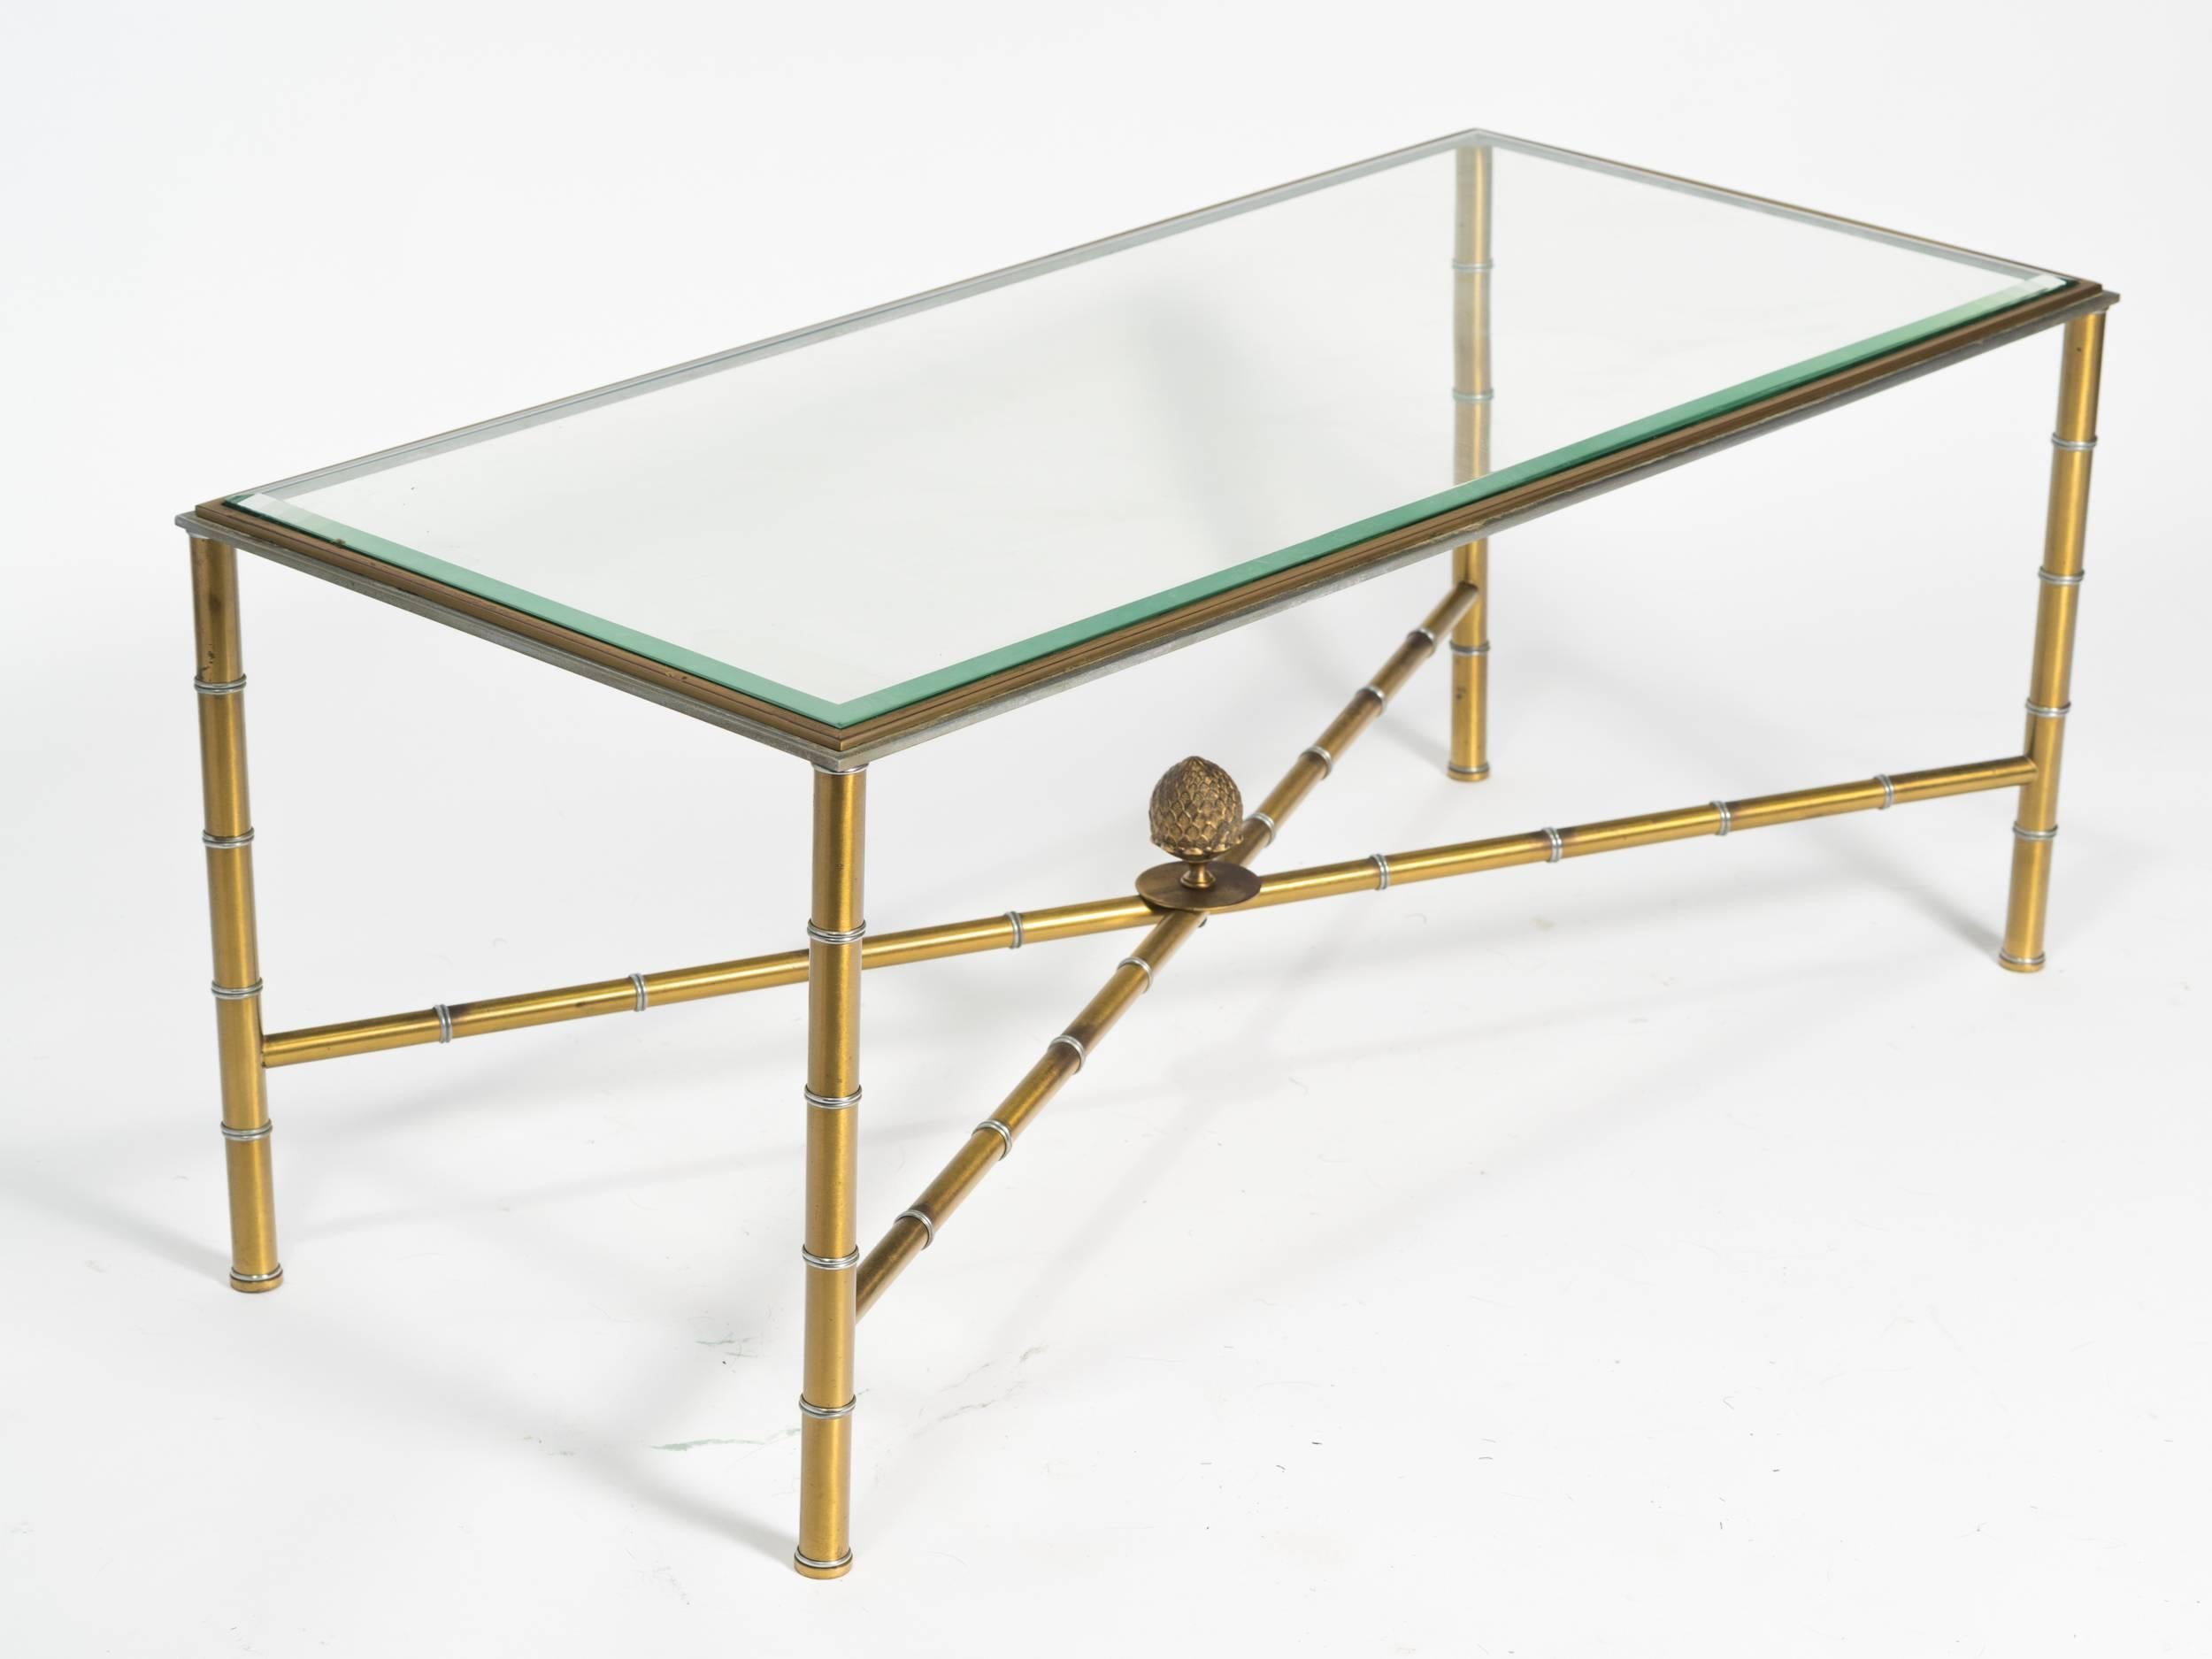 1950s faux bamboo coffee table with glass top.